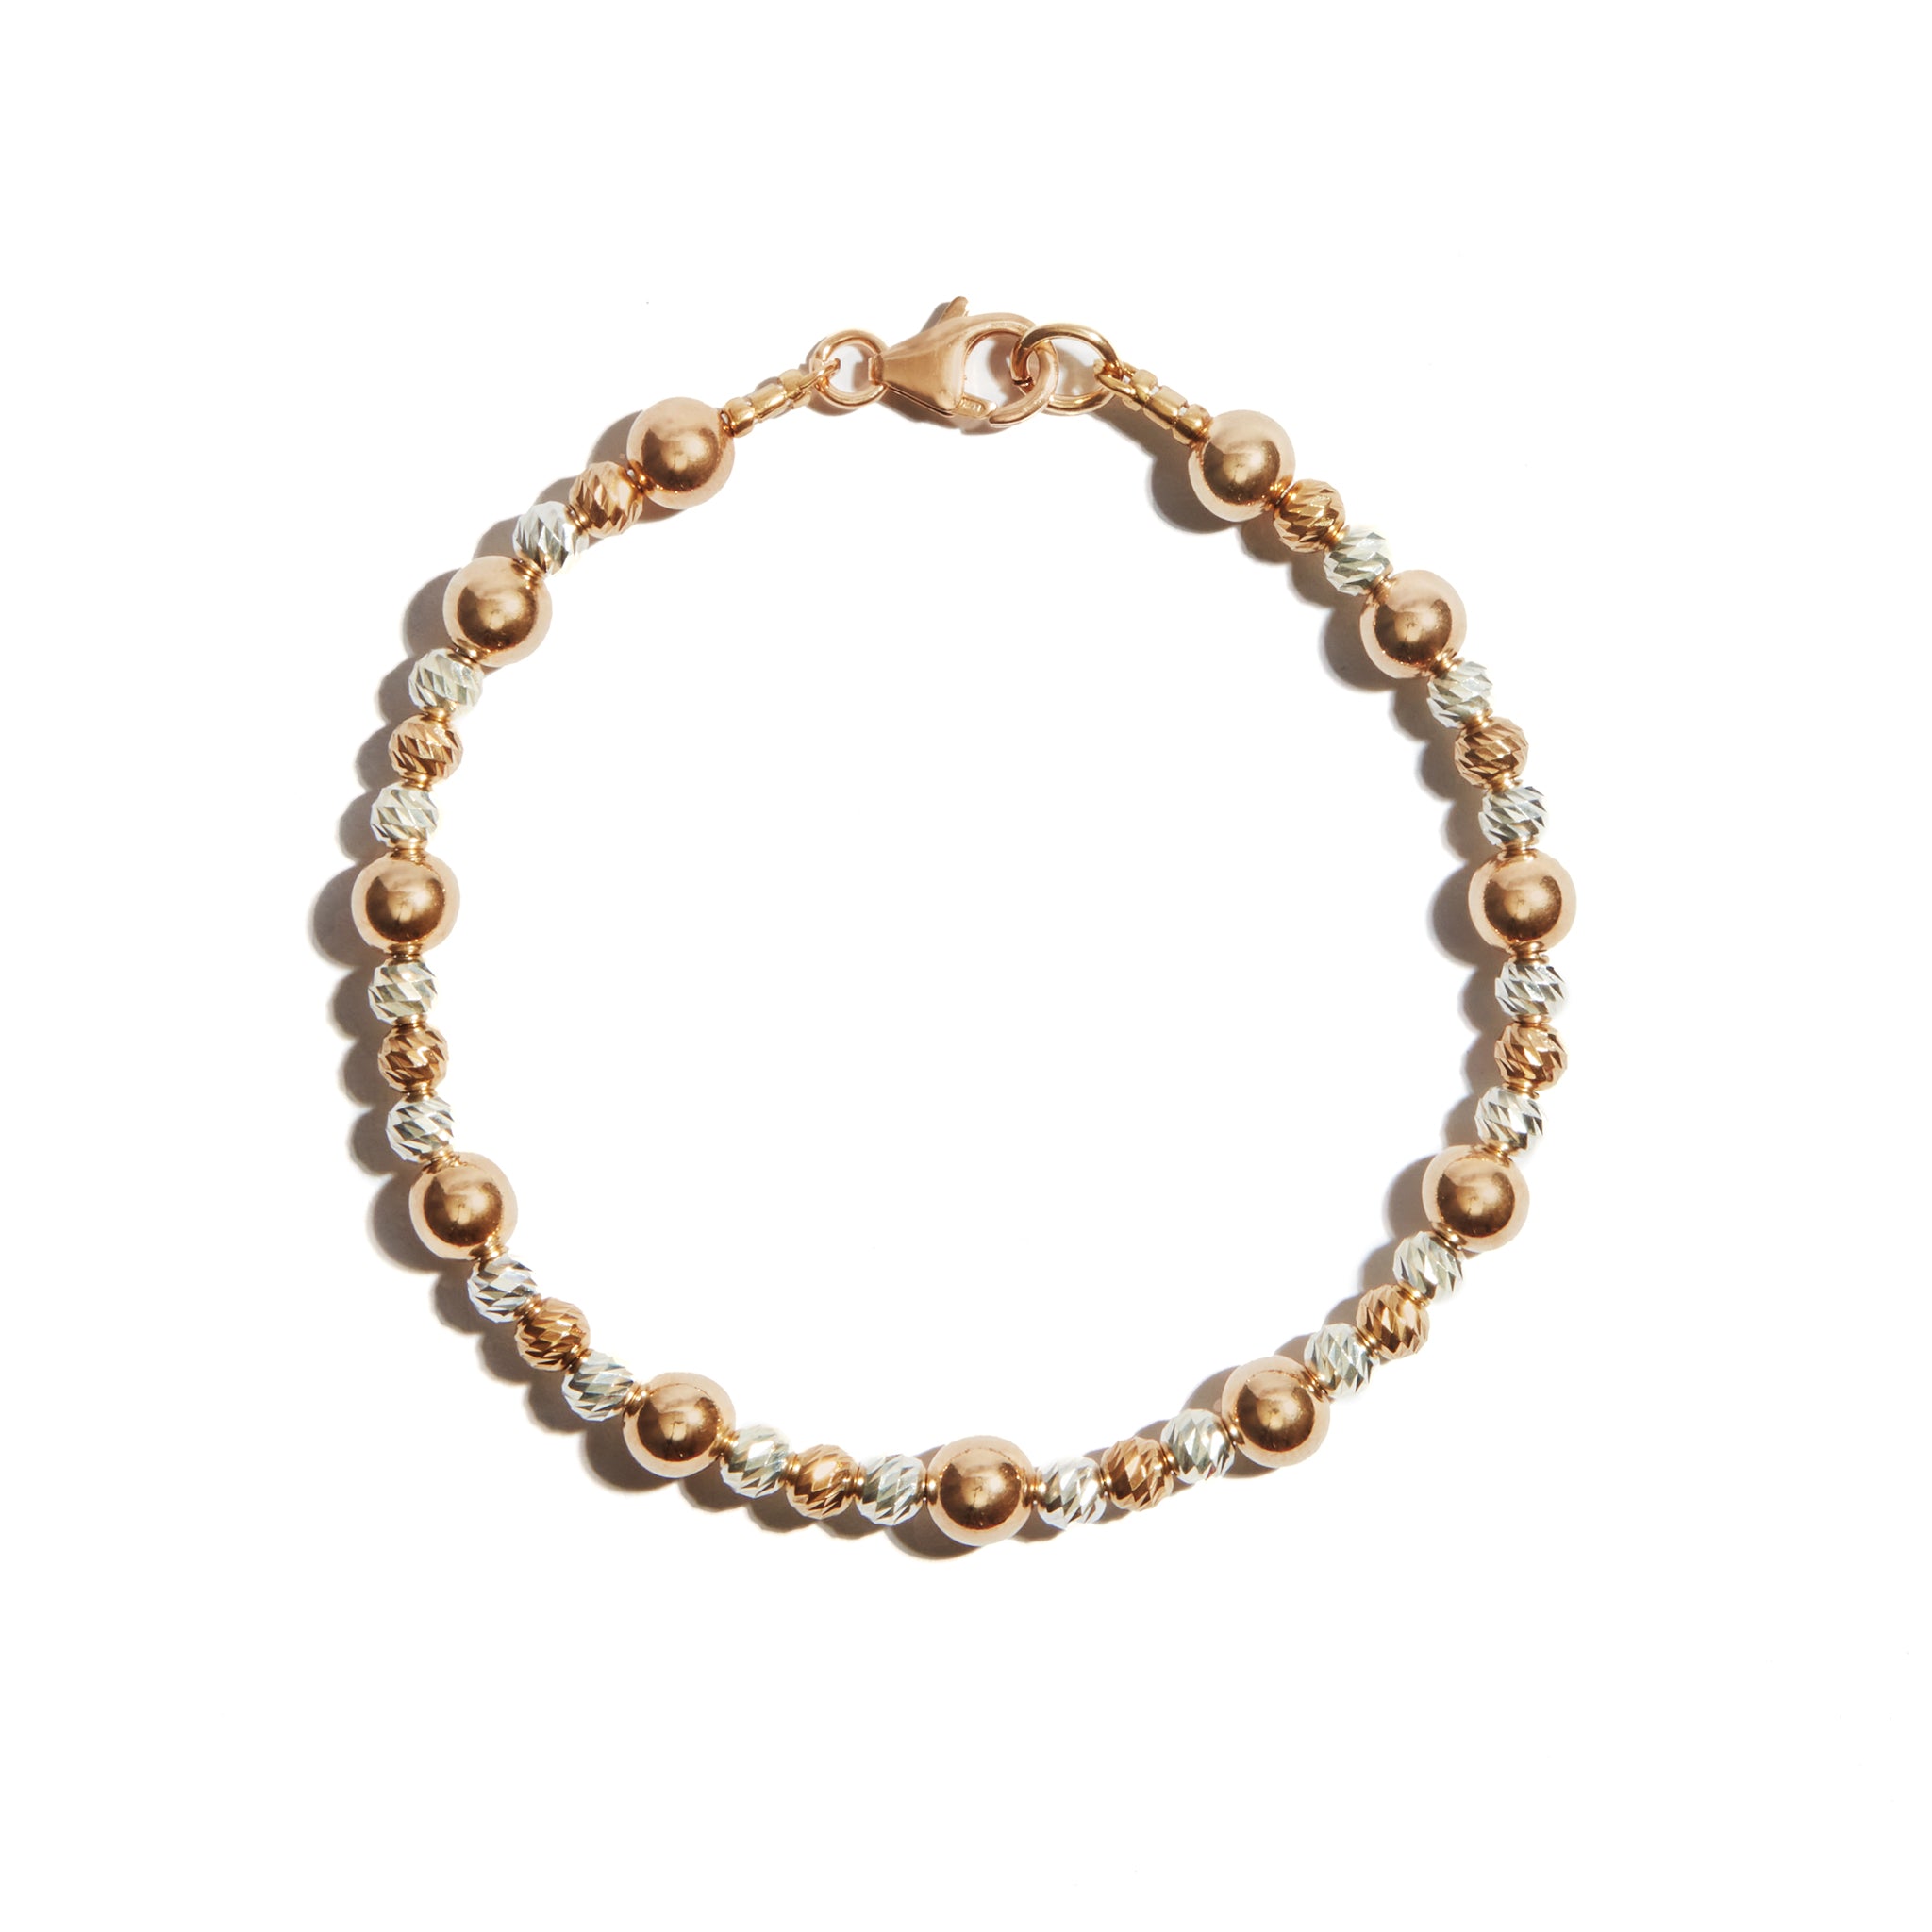 A stylish two-tone bracelet featuring alternating beads made of 14ct gold fill and sterling silver, with larger beads adding extra flair.